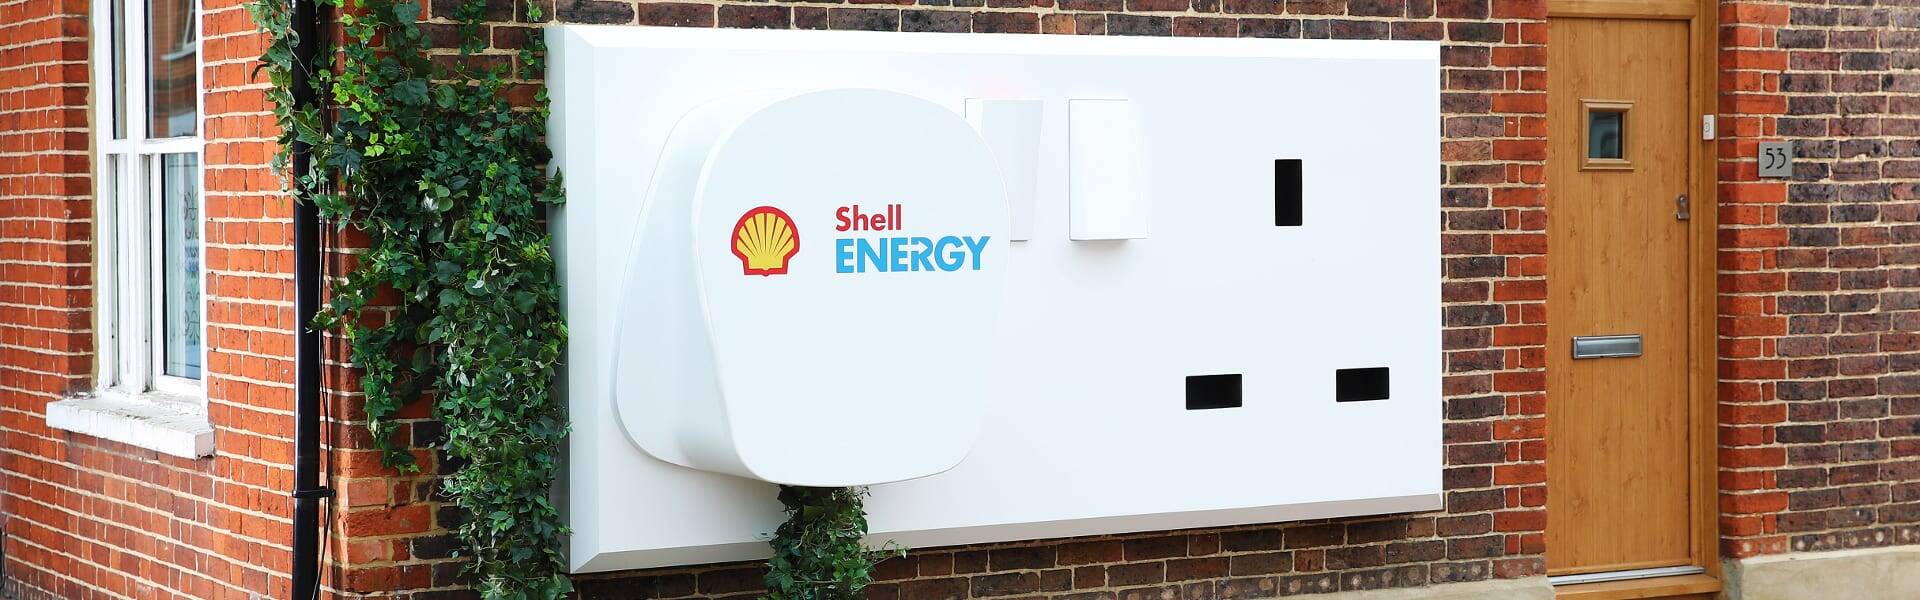 Shell Energy blames ‘unsustainable’ pricing as losses triple